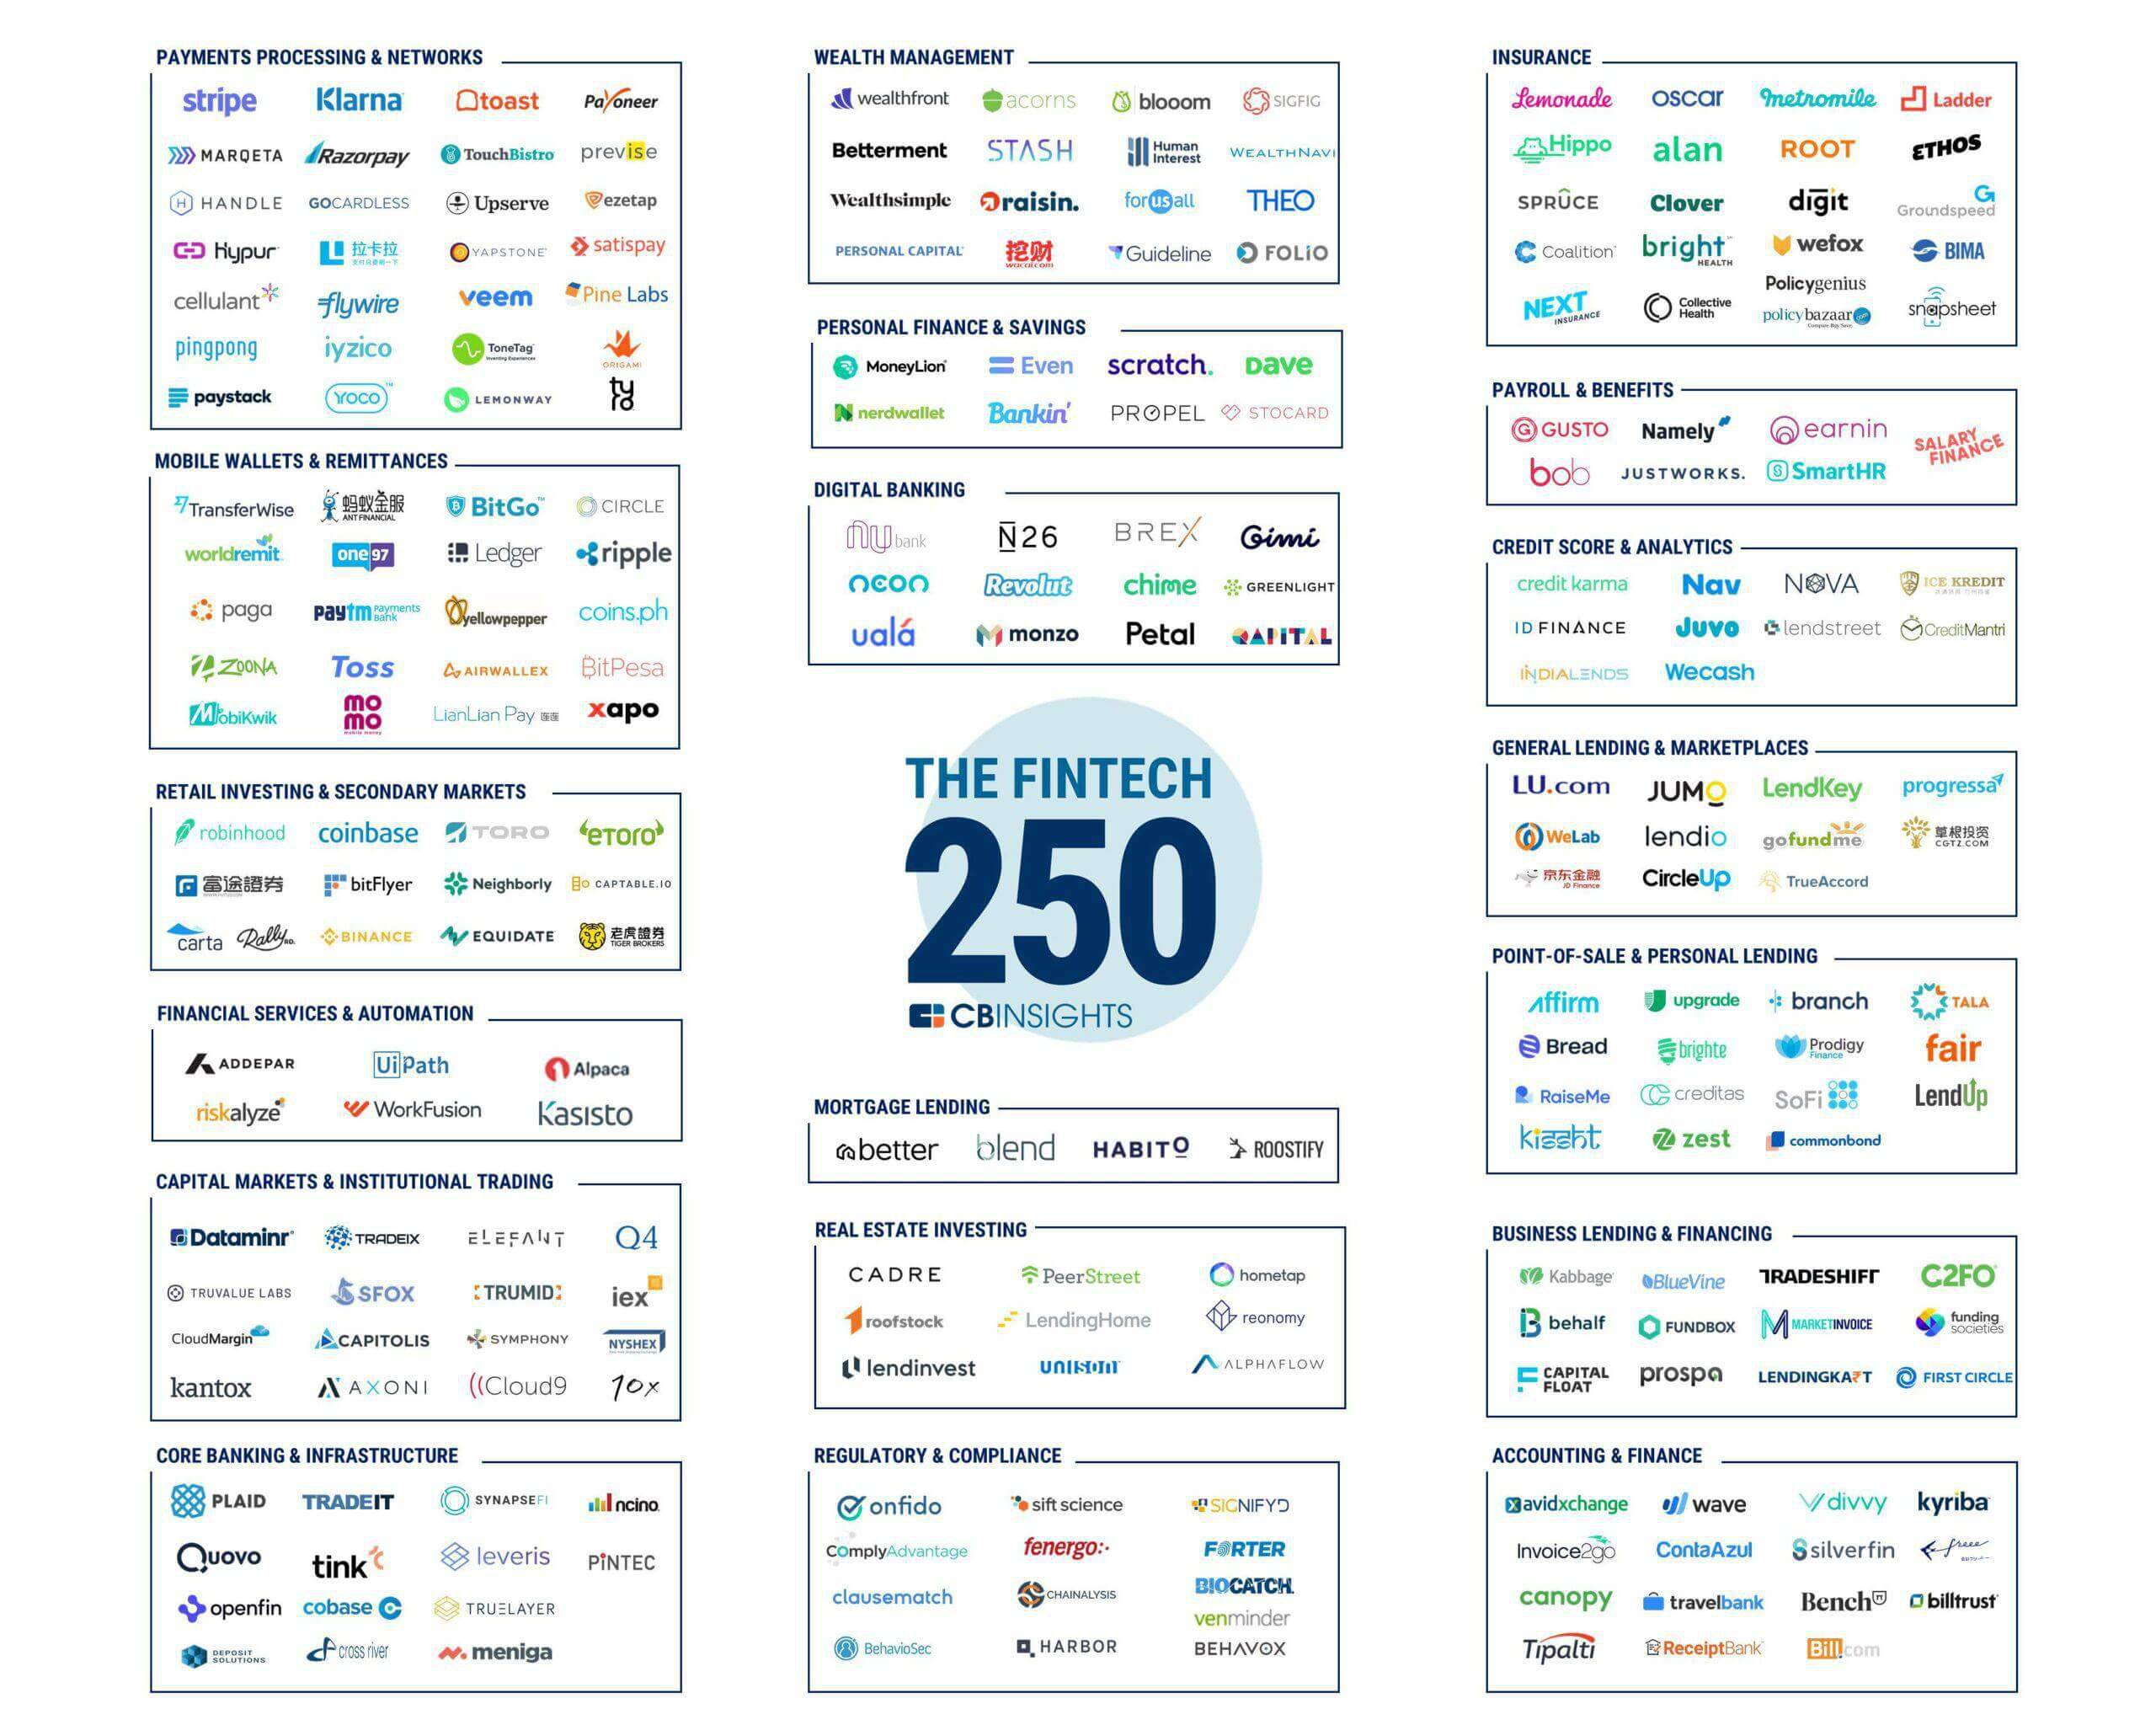 Twisted tunge bælte The Fintech 250: The Top Fintech Companies Of 2020 - CB Insights Research